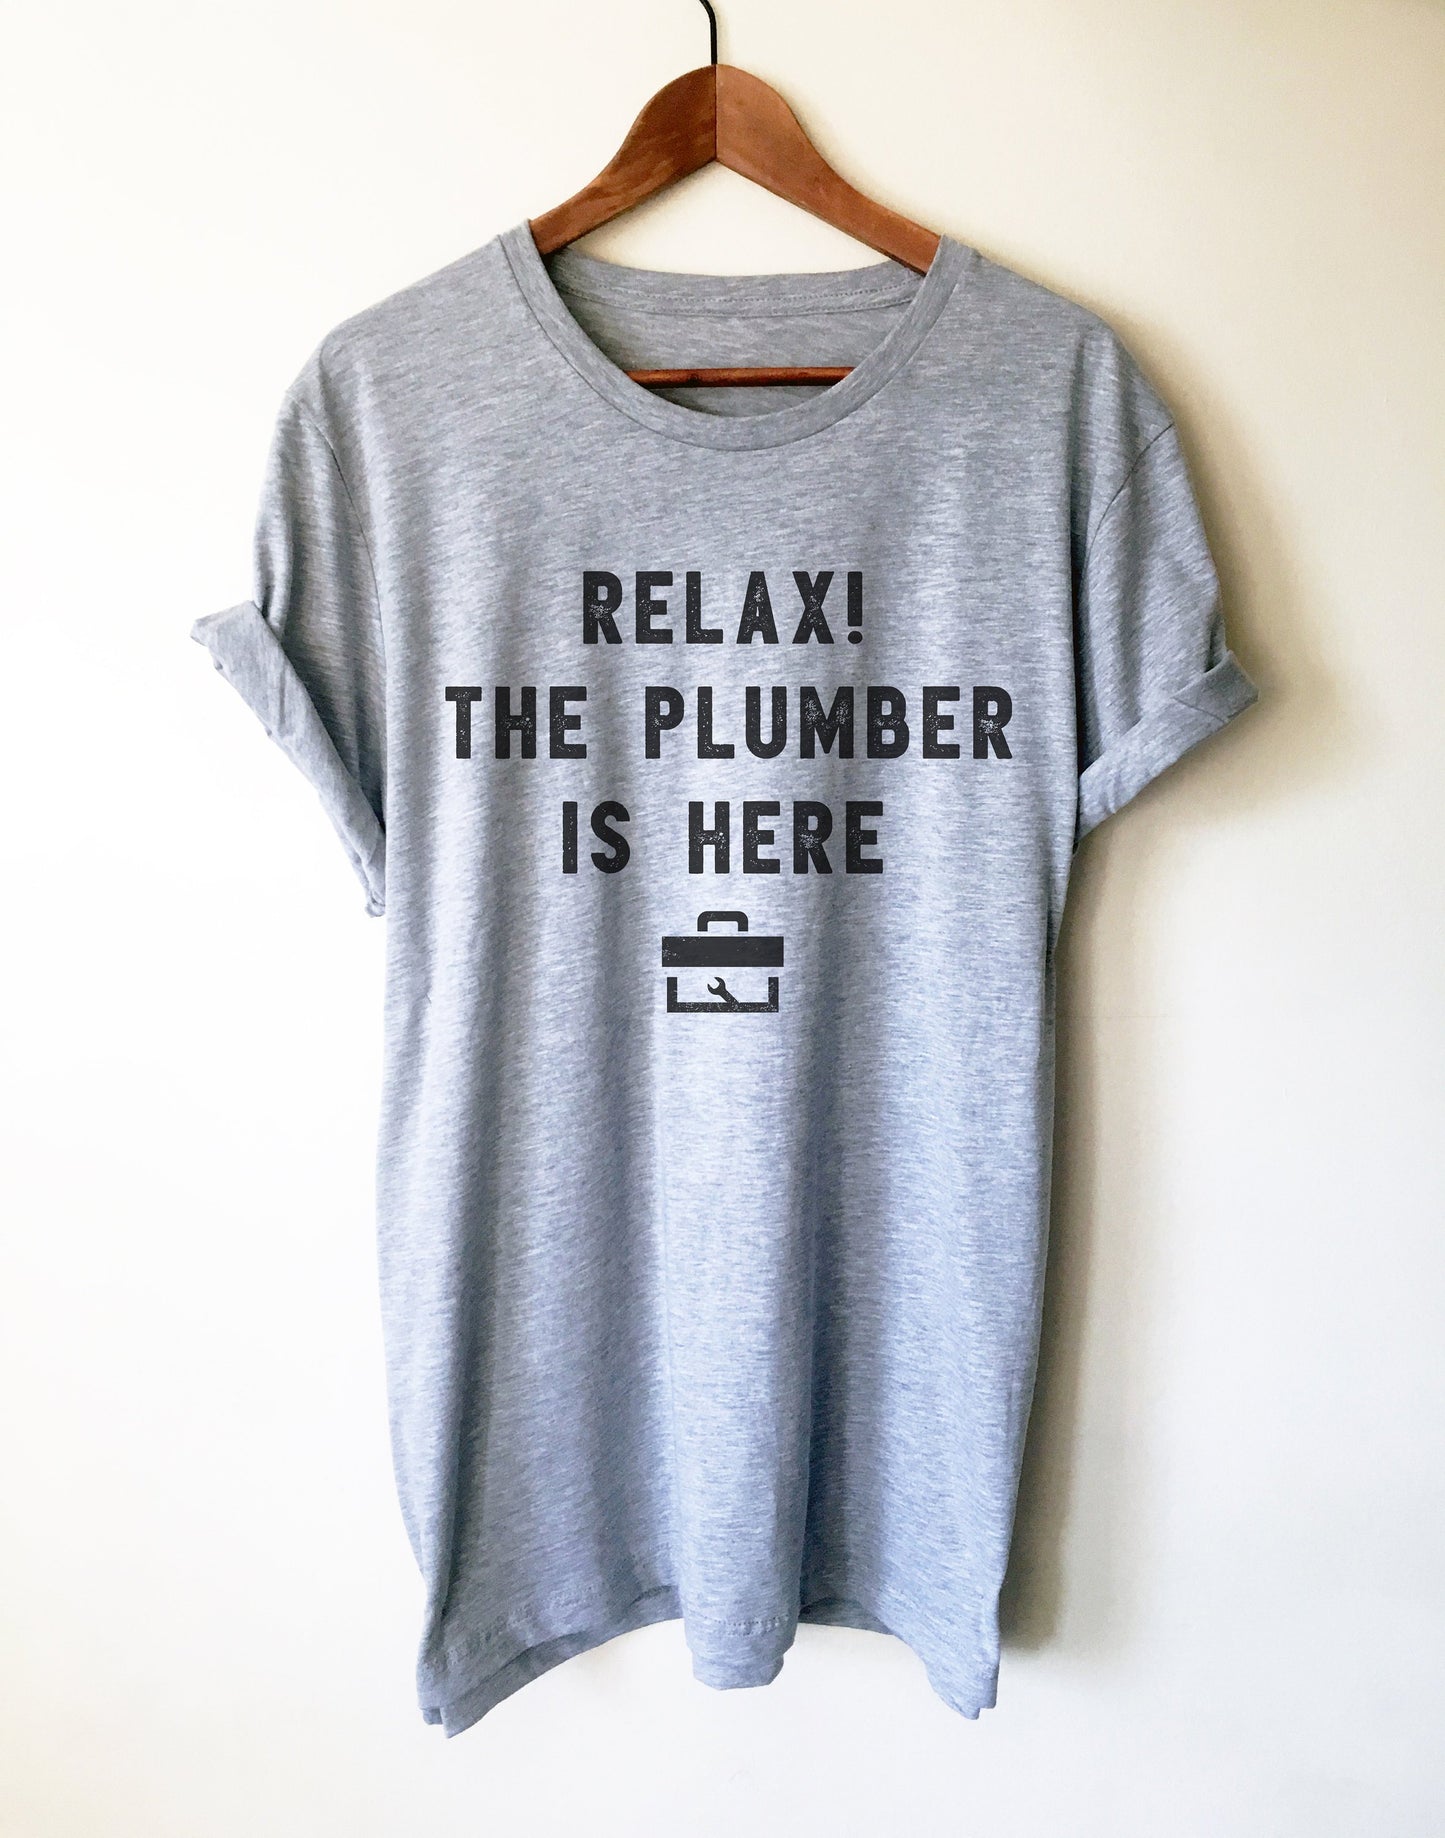 Relax! The Plumber Is Here Unisex Shirt - Plumber, Plumber T-Shirt, Plumbing Shirt, Plumber Gift, Fathers Day Gift, Gift For Dad